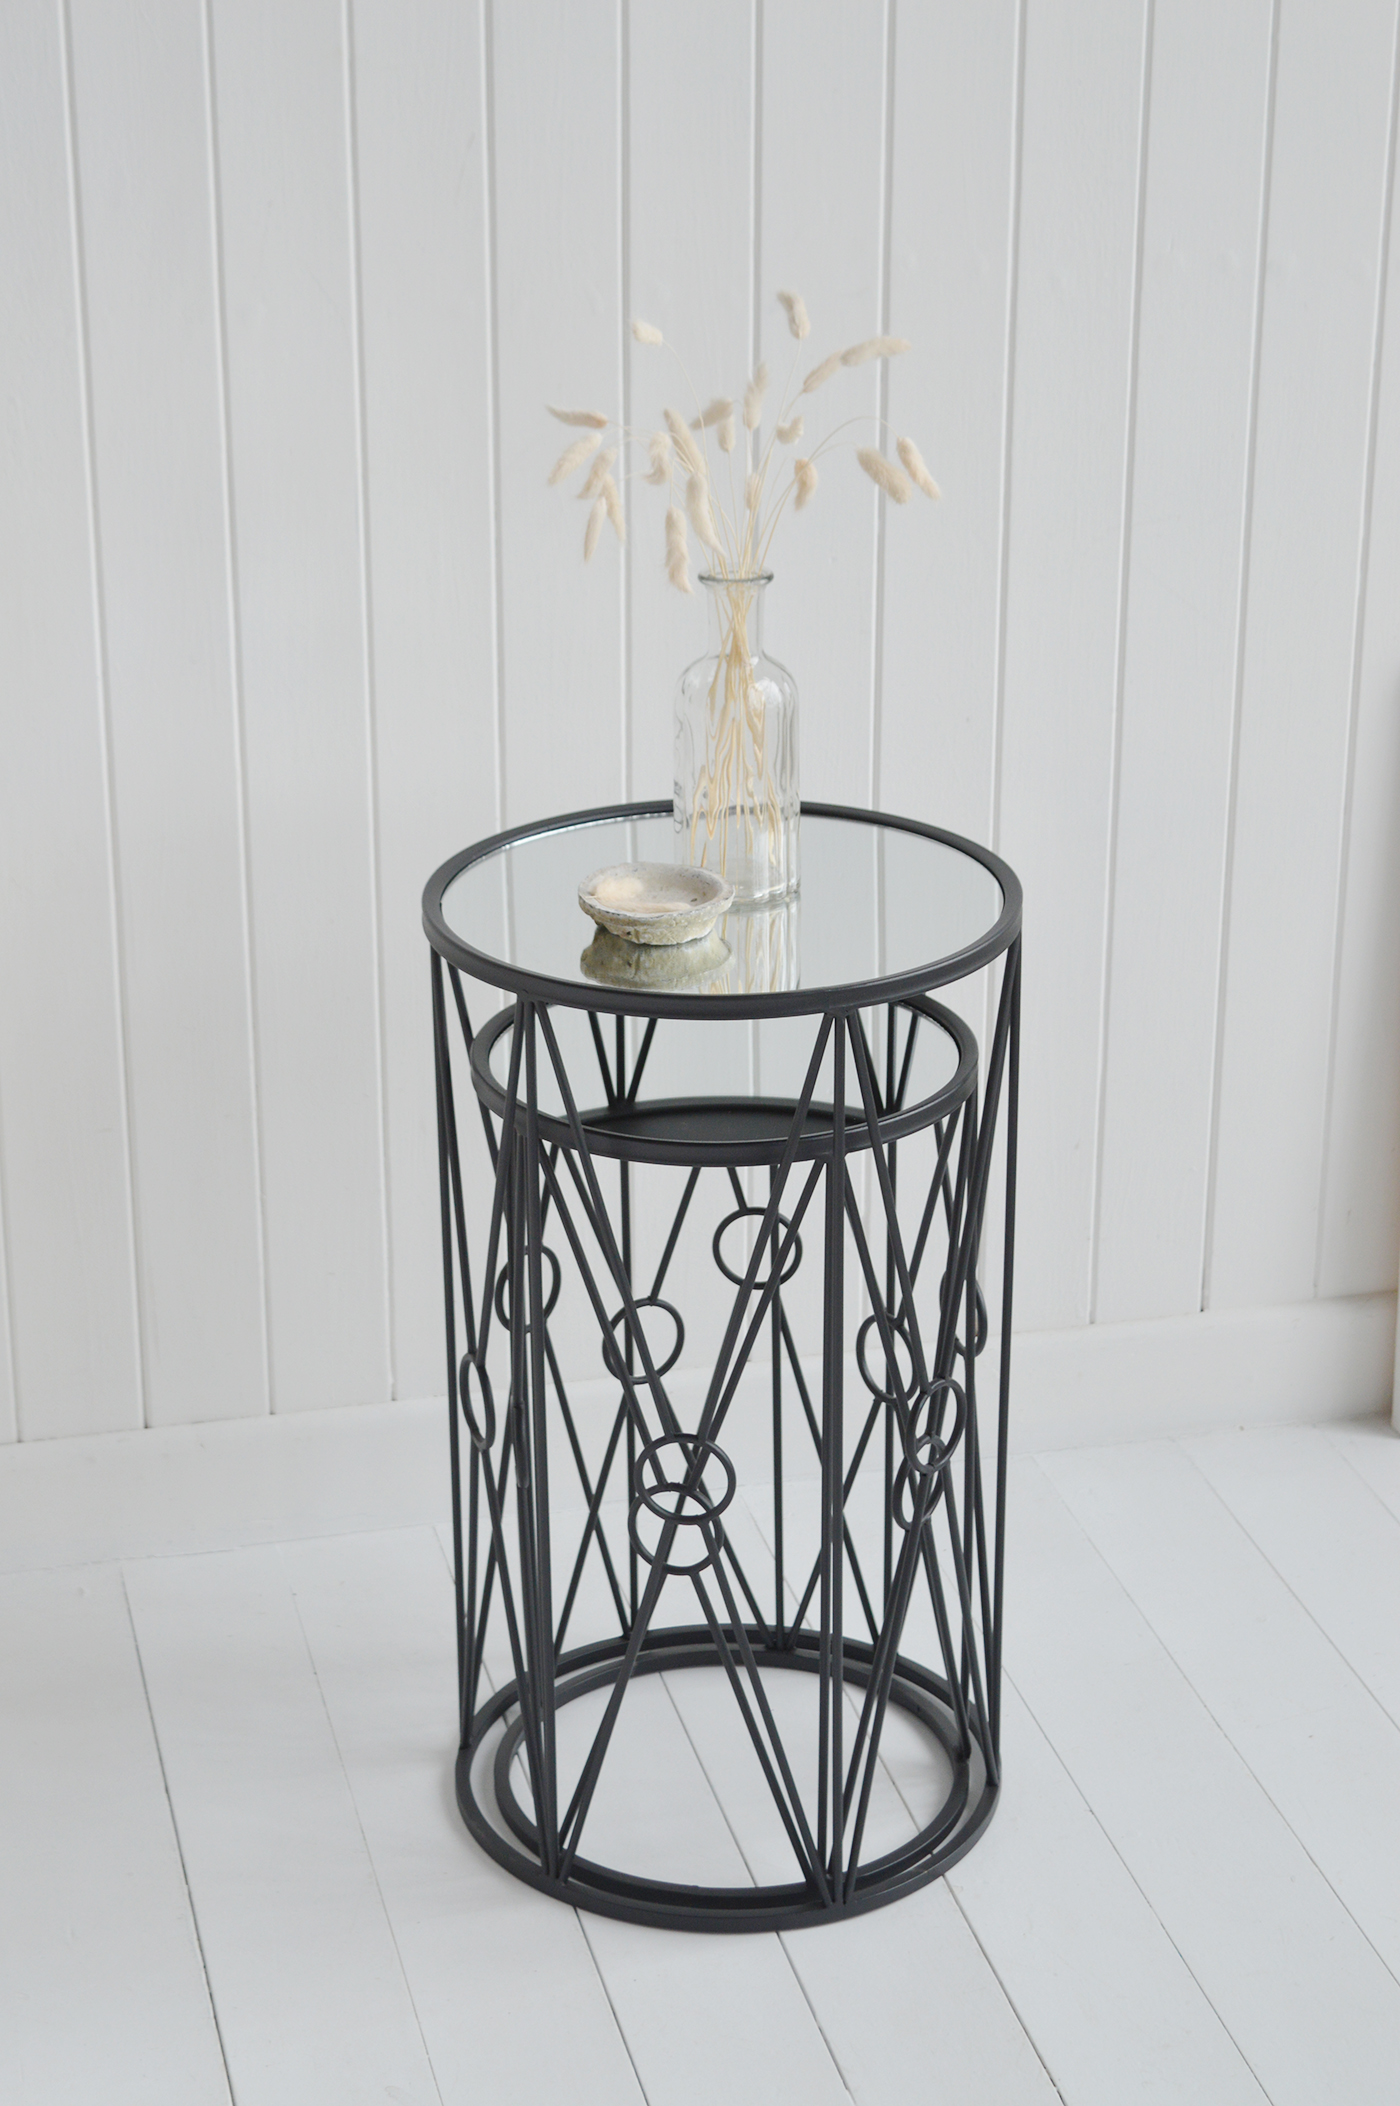 Ascot Lamp Table. Elegant New England Coastal and Country Furniture.  Mixed with natural materials, cushions and throws with plently of texture and interest gives a classic New England look to your interior